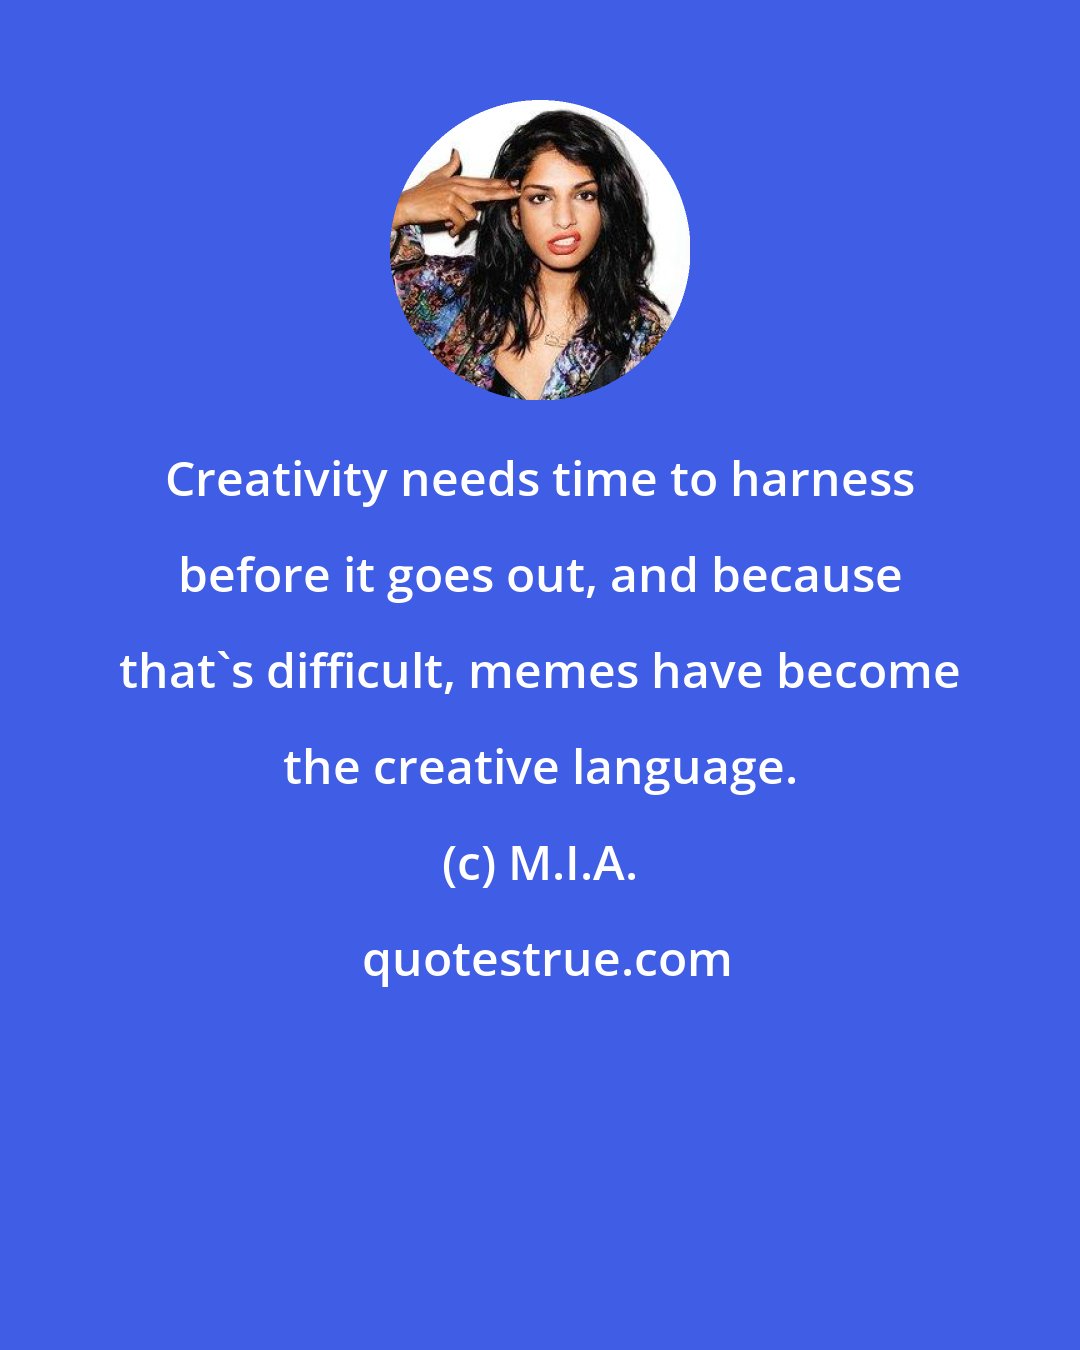 M.I.A.: Creativity needs time to harness before it goes out, and because that's difficult, memes have become the creative language.